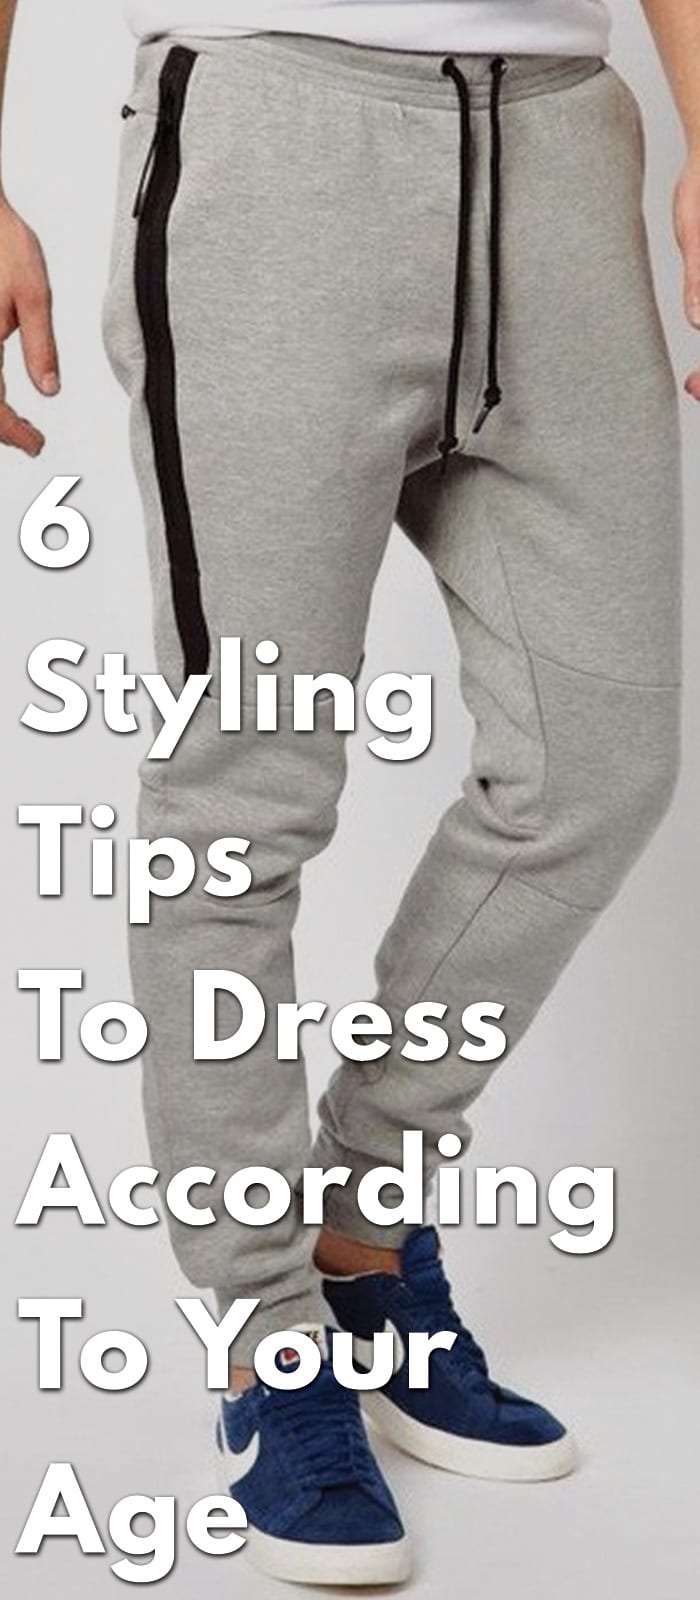 6-Styling-Tips-To-Dress-According-To-Your-Age